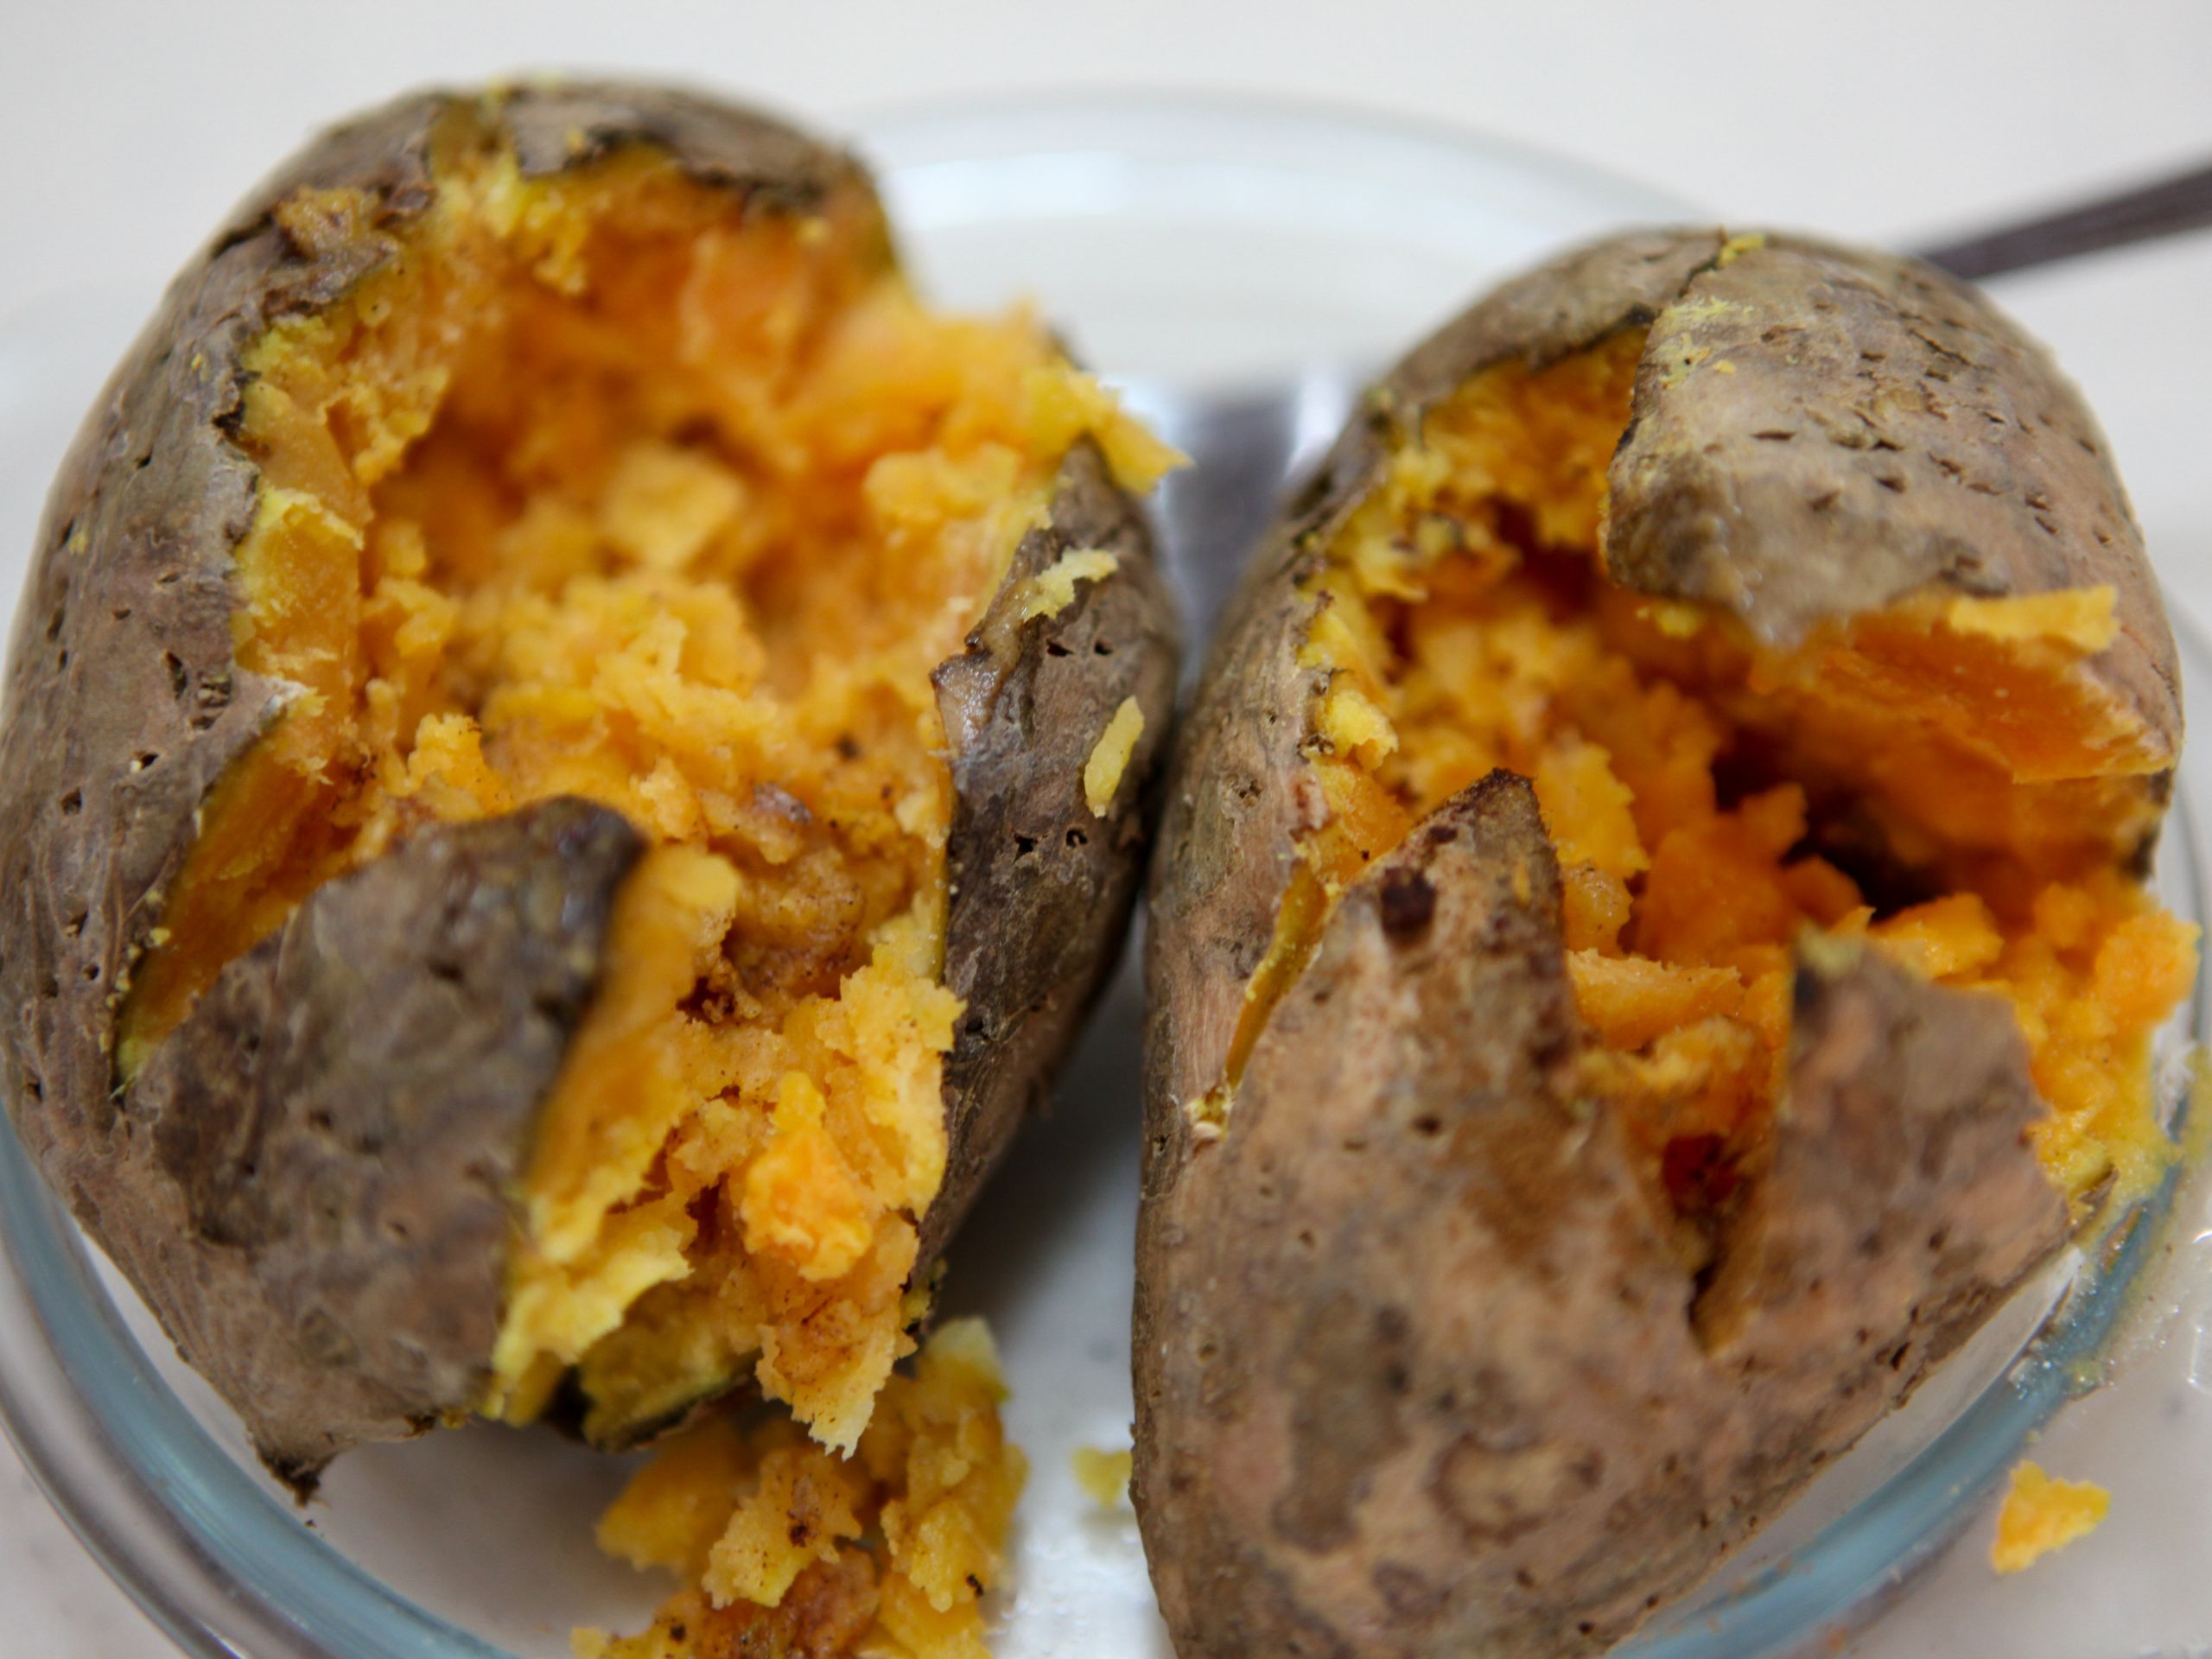 Cooking Sweet Potato In Microwave
 How to Cook a Sweet Potato in the Microwave 11 Steps